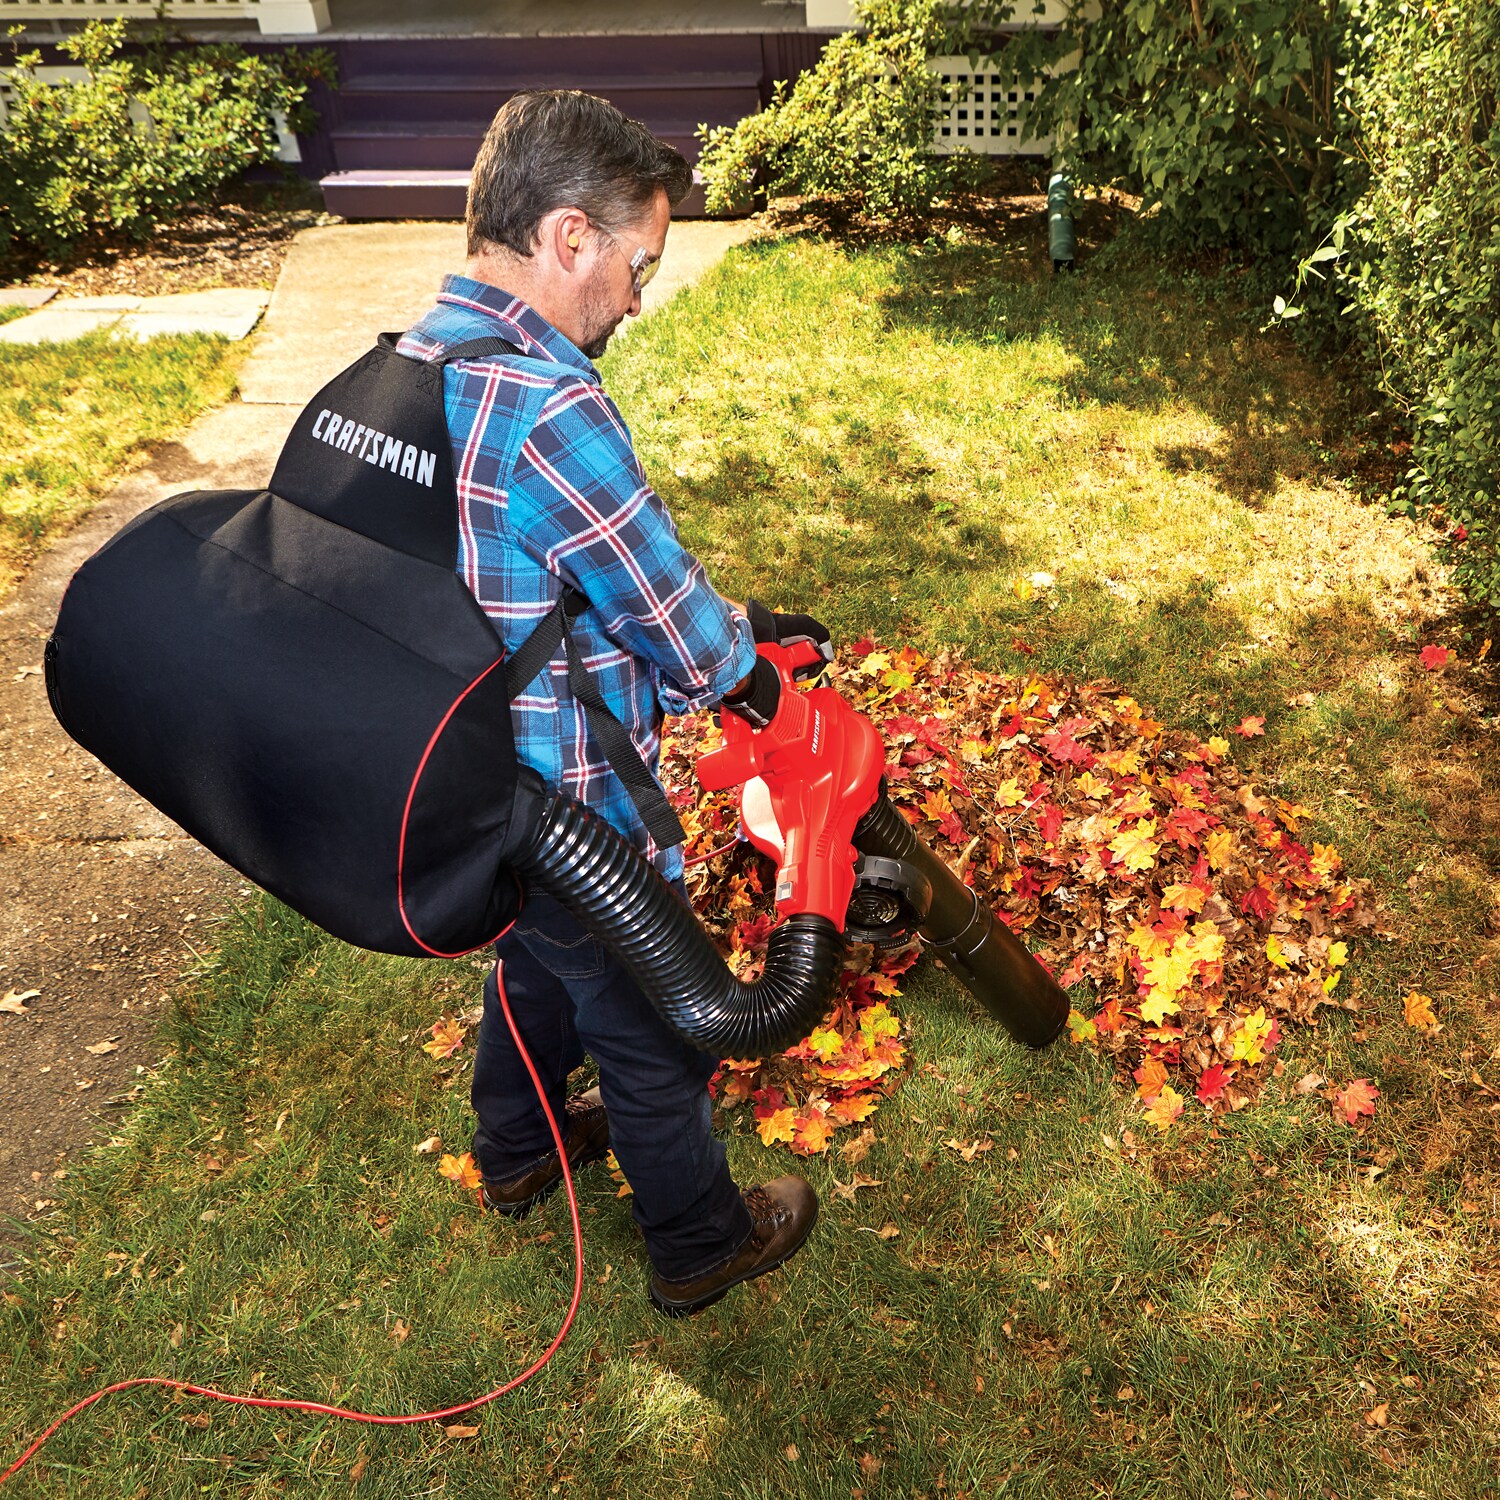 Earthwise BVM20010 10-Amp Two-Speed Corded Electric 3-in-1 Blower/Vacuum/Mulcher 